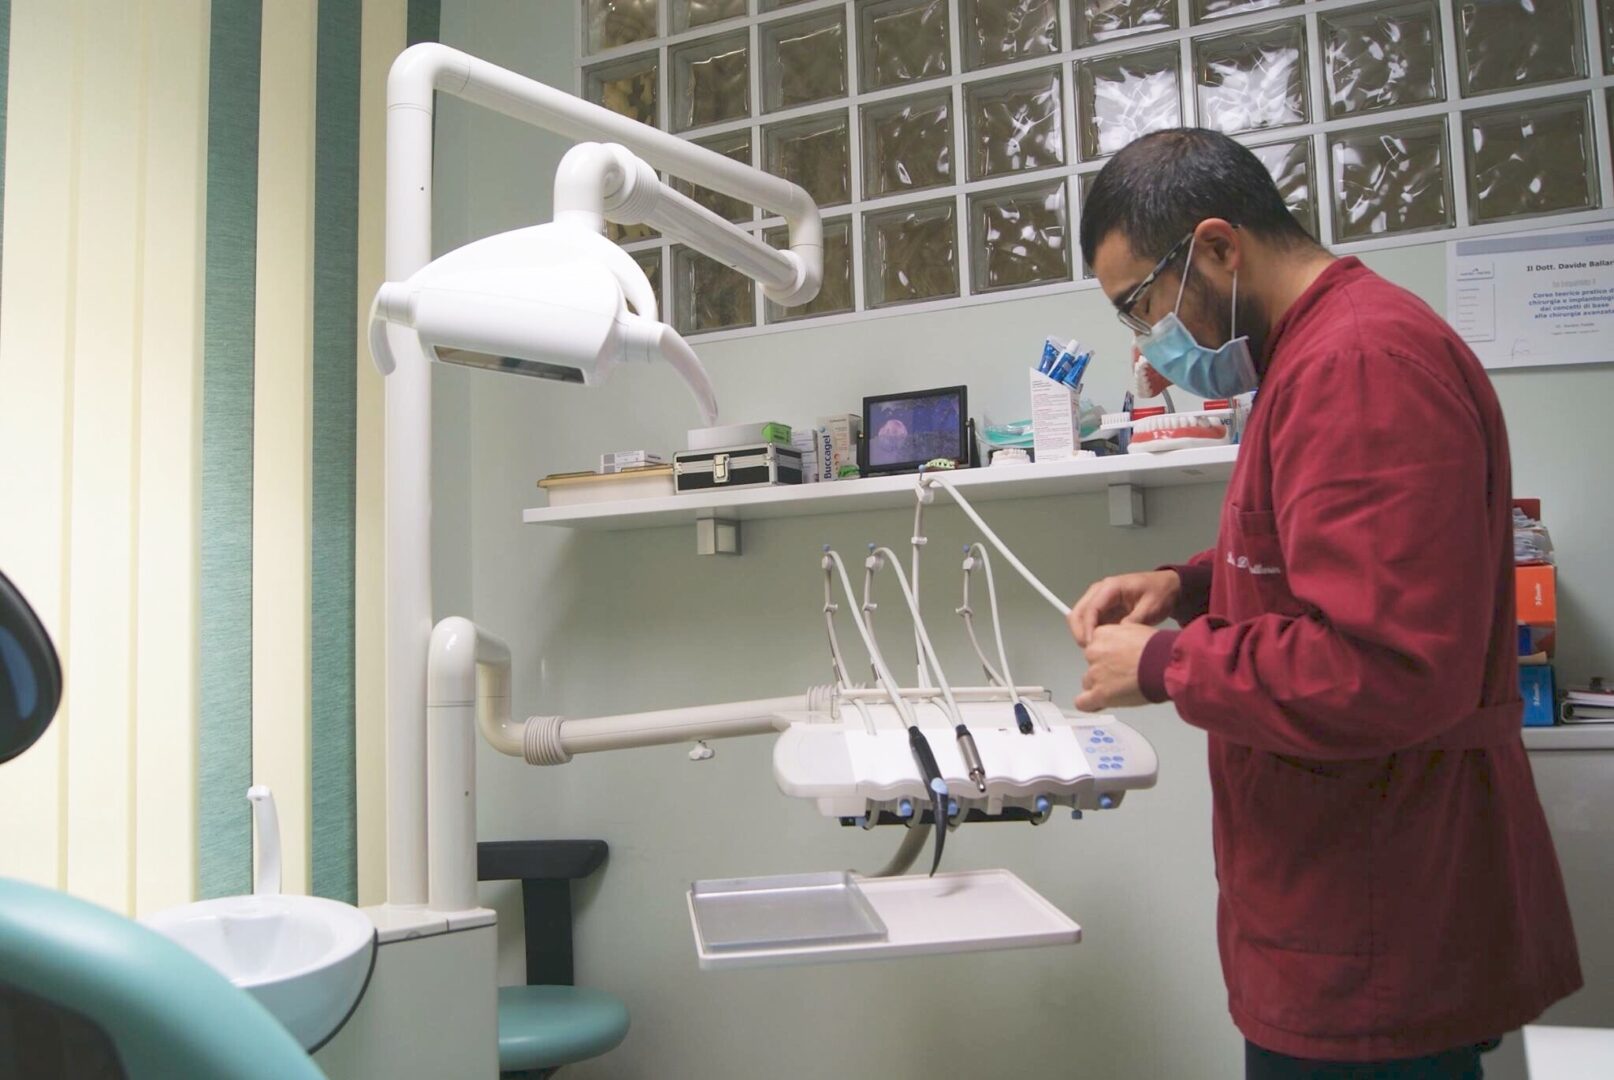 A man is working in an office with dental equipment.